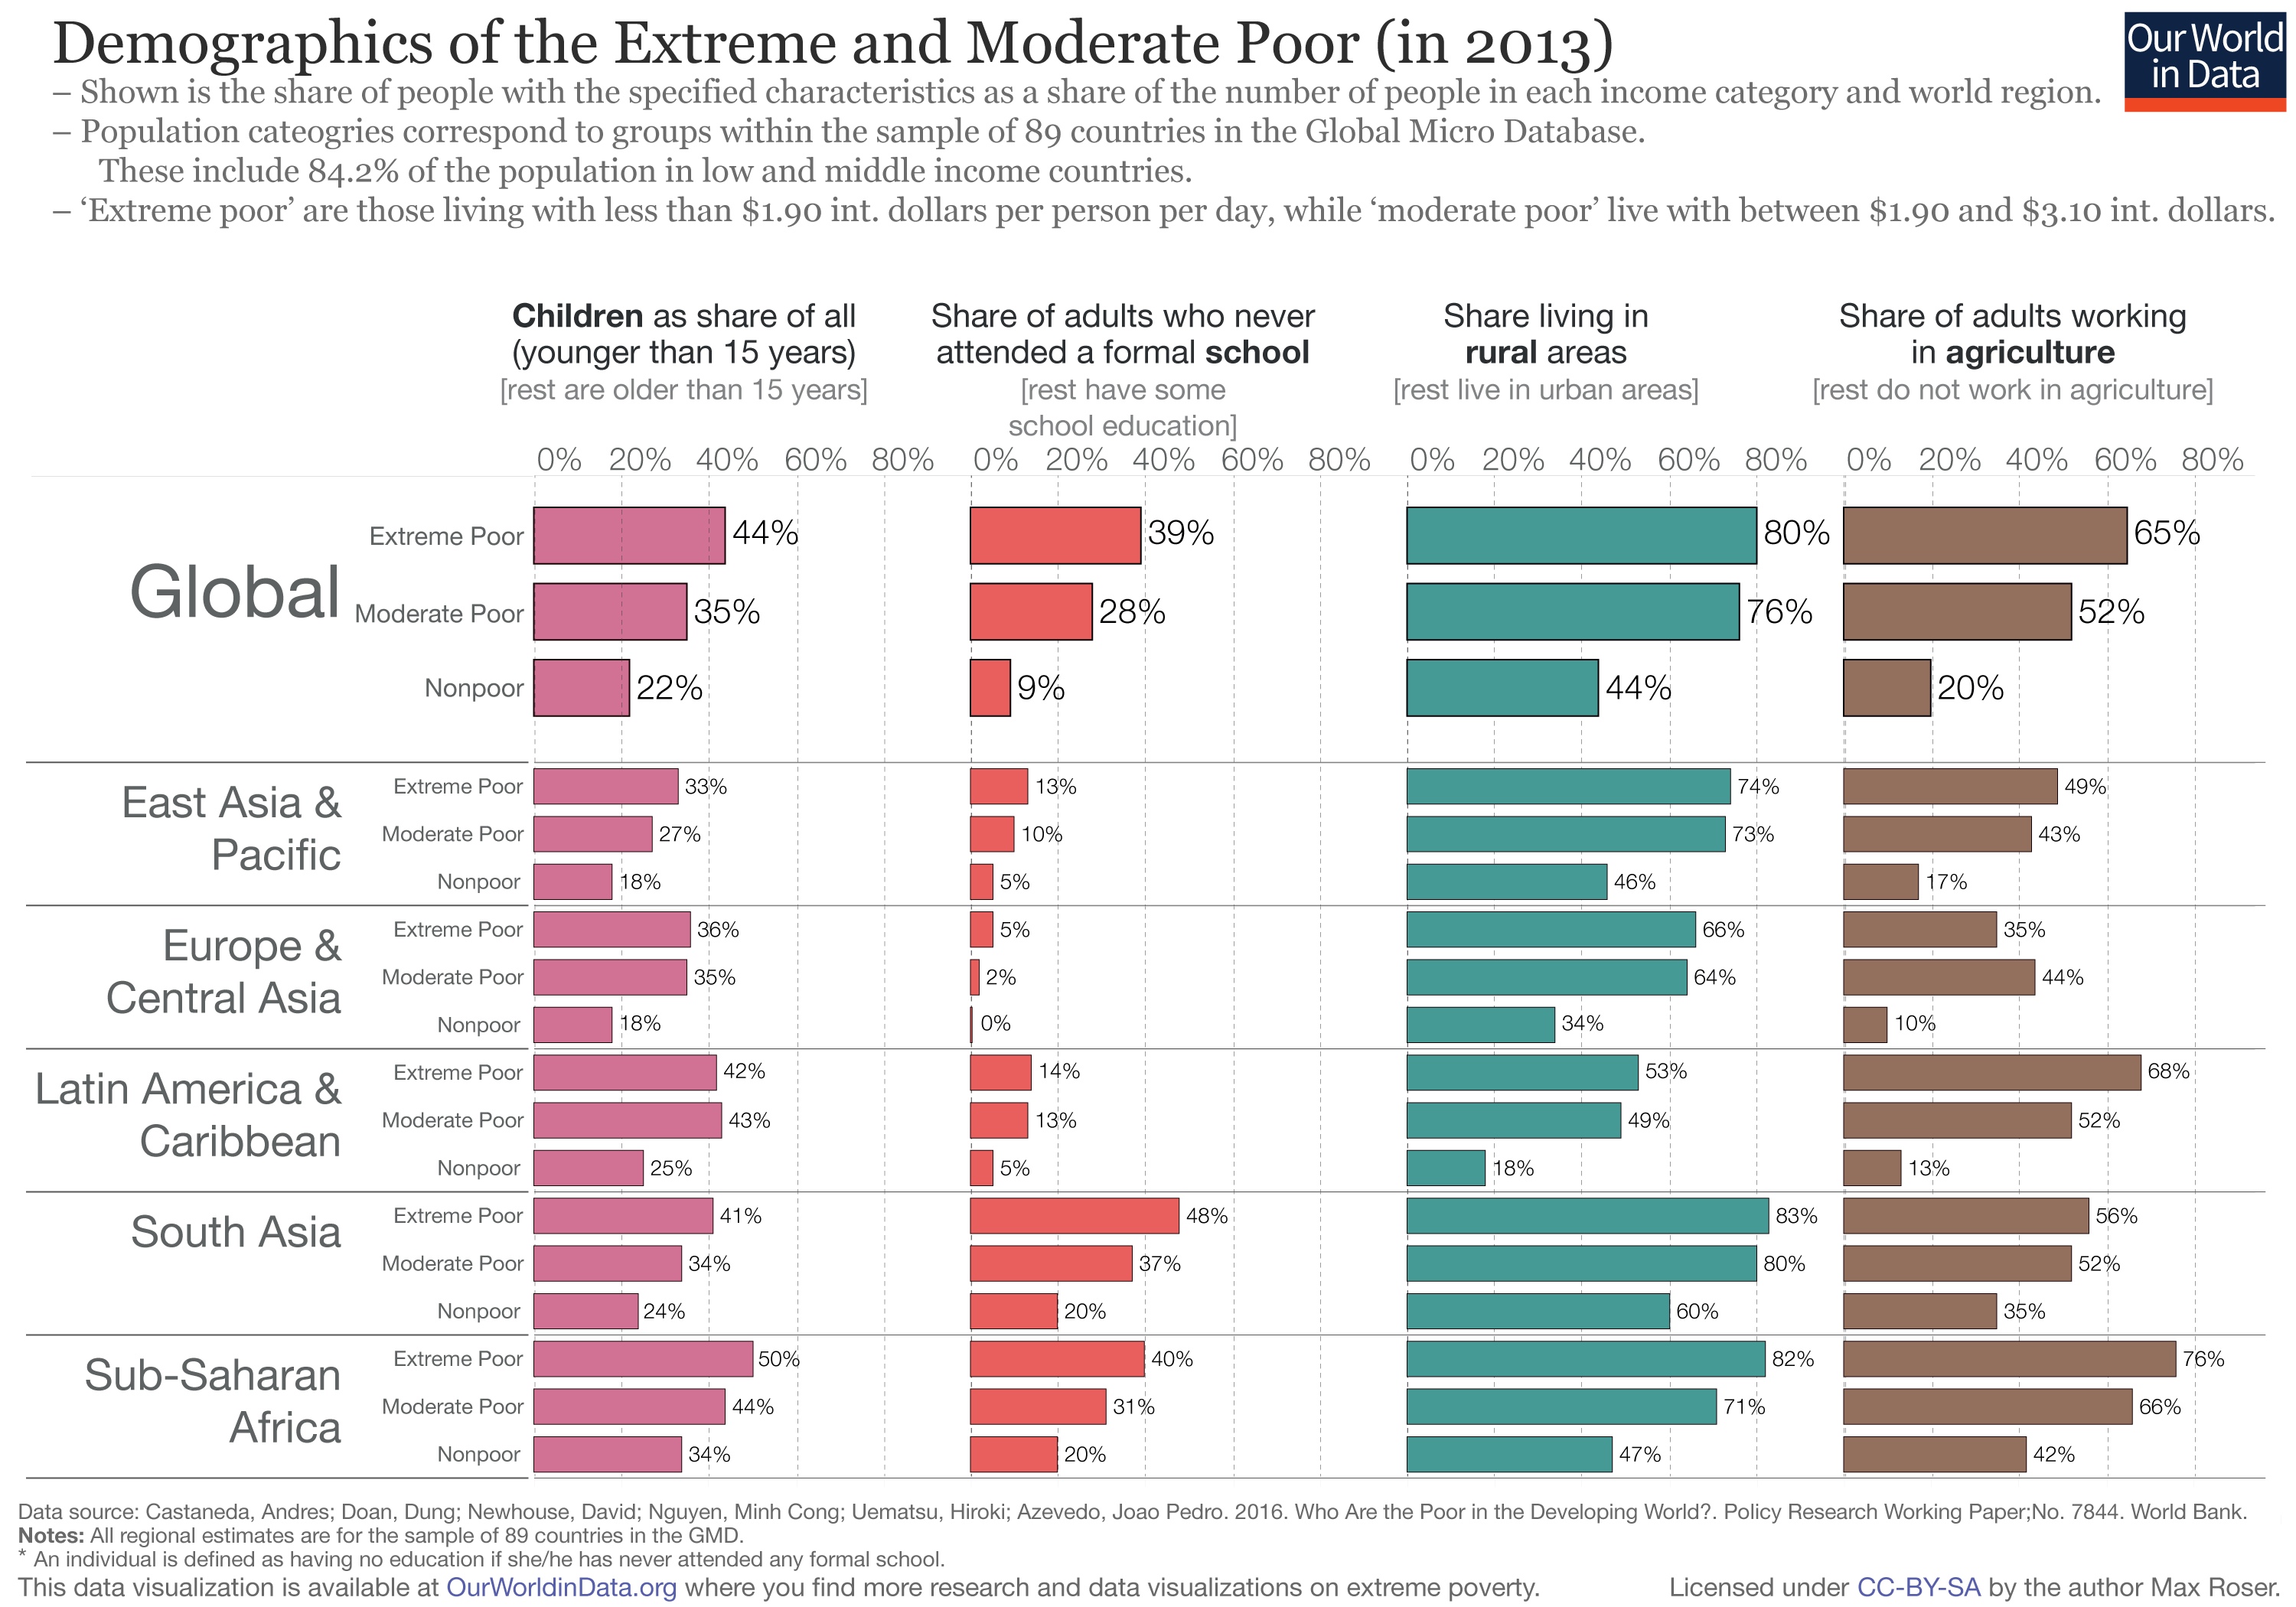 Global Extreme Poverty - Our World in Data